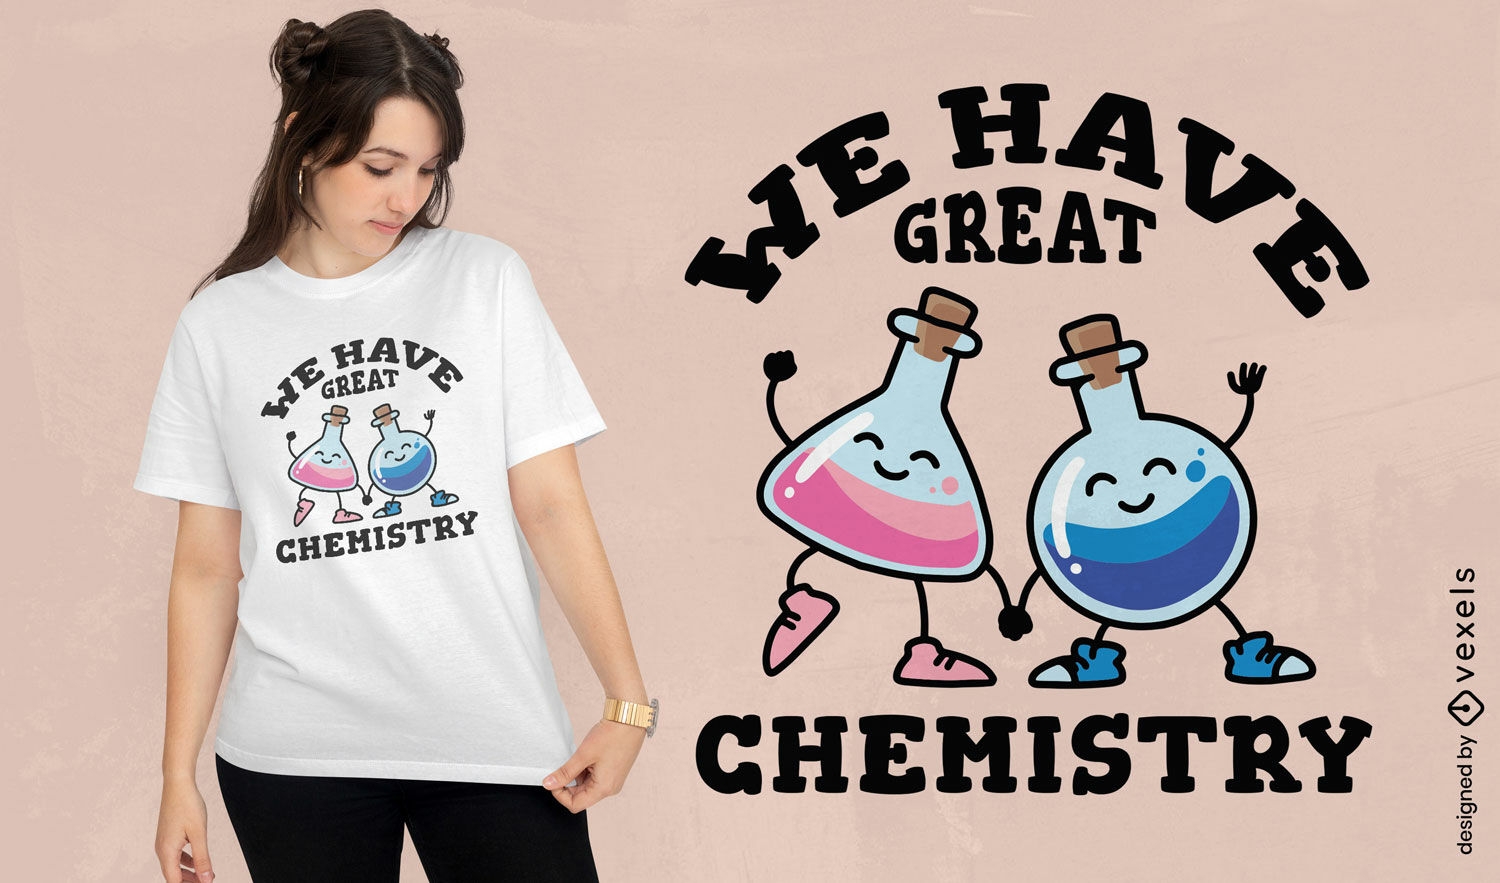 We have great chemistry t-shirt design